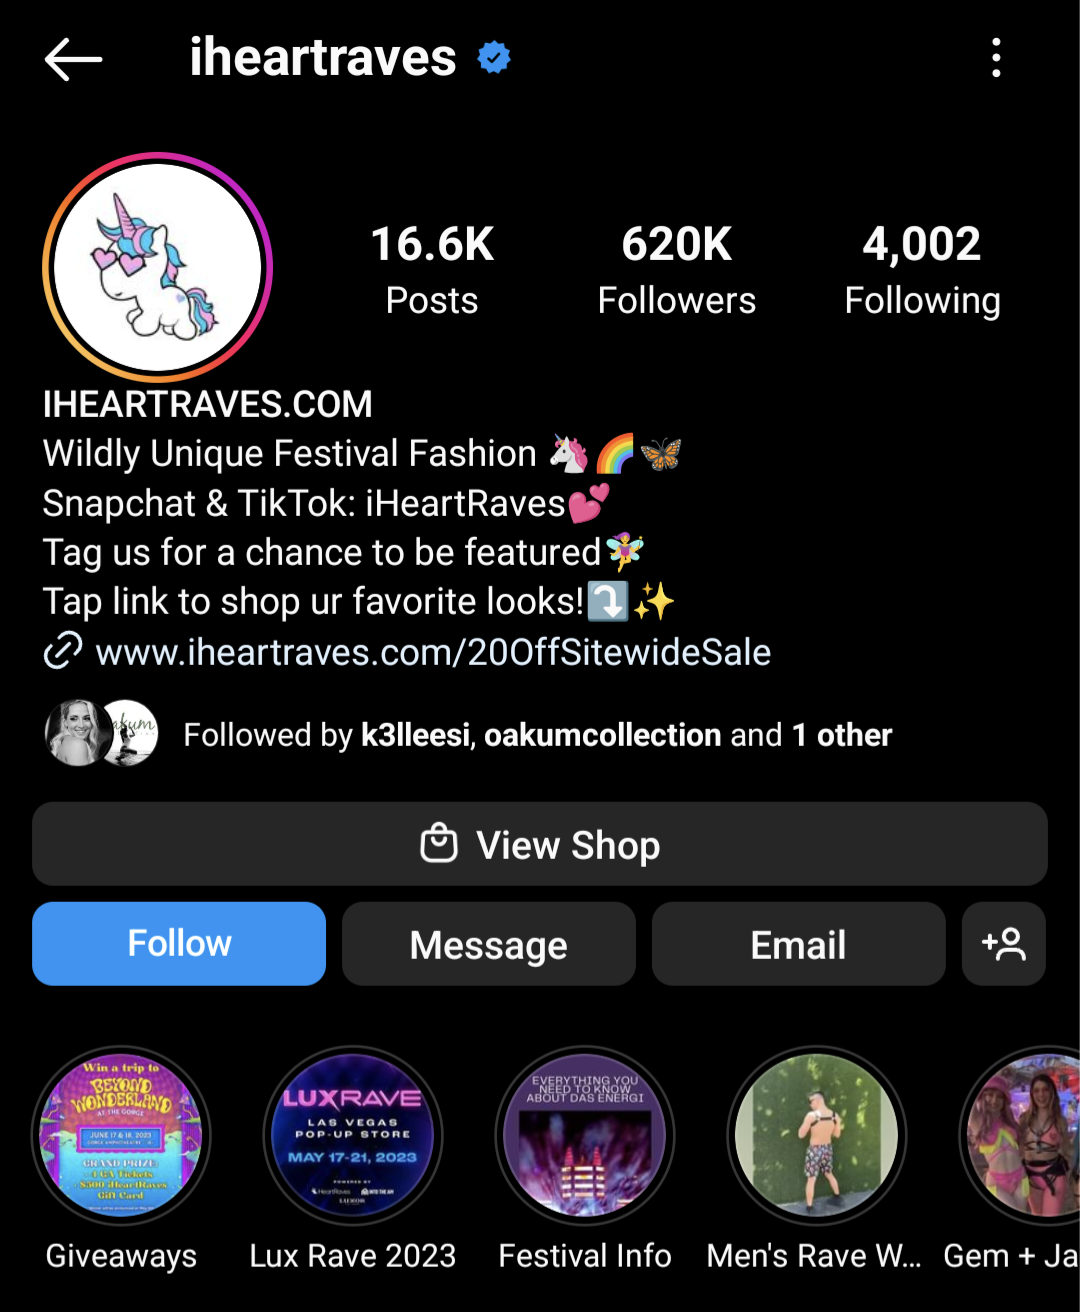 iHeart Raves Instagram bio uses emojis to appeal to their customers